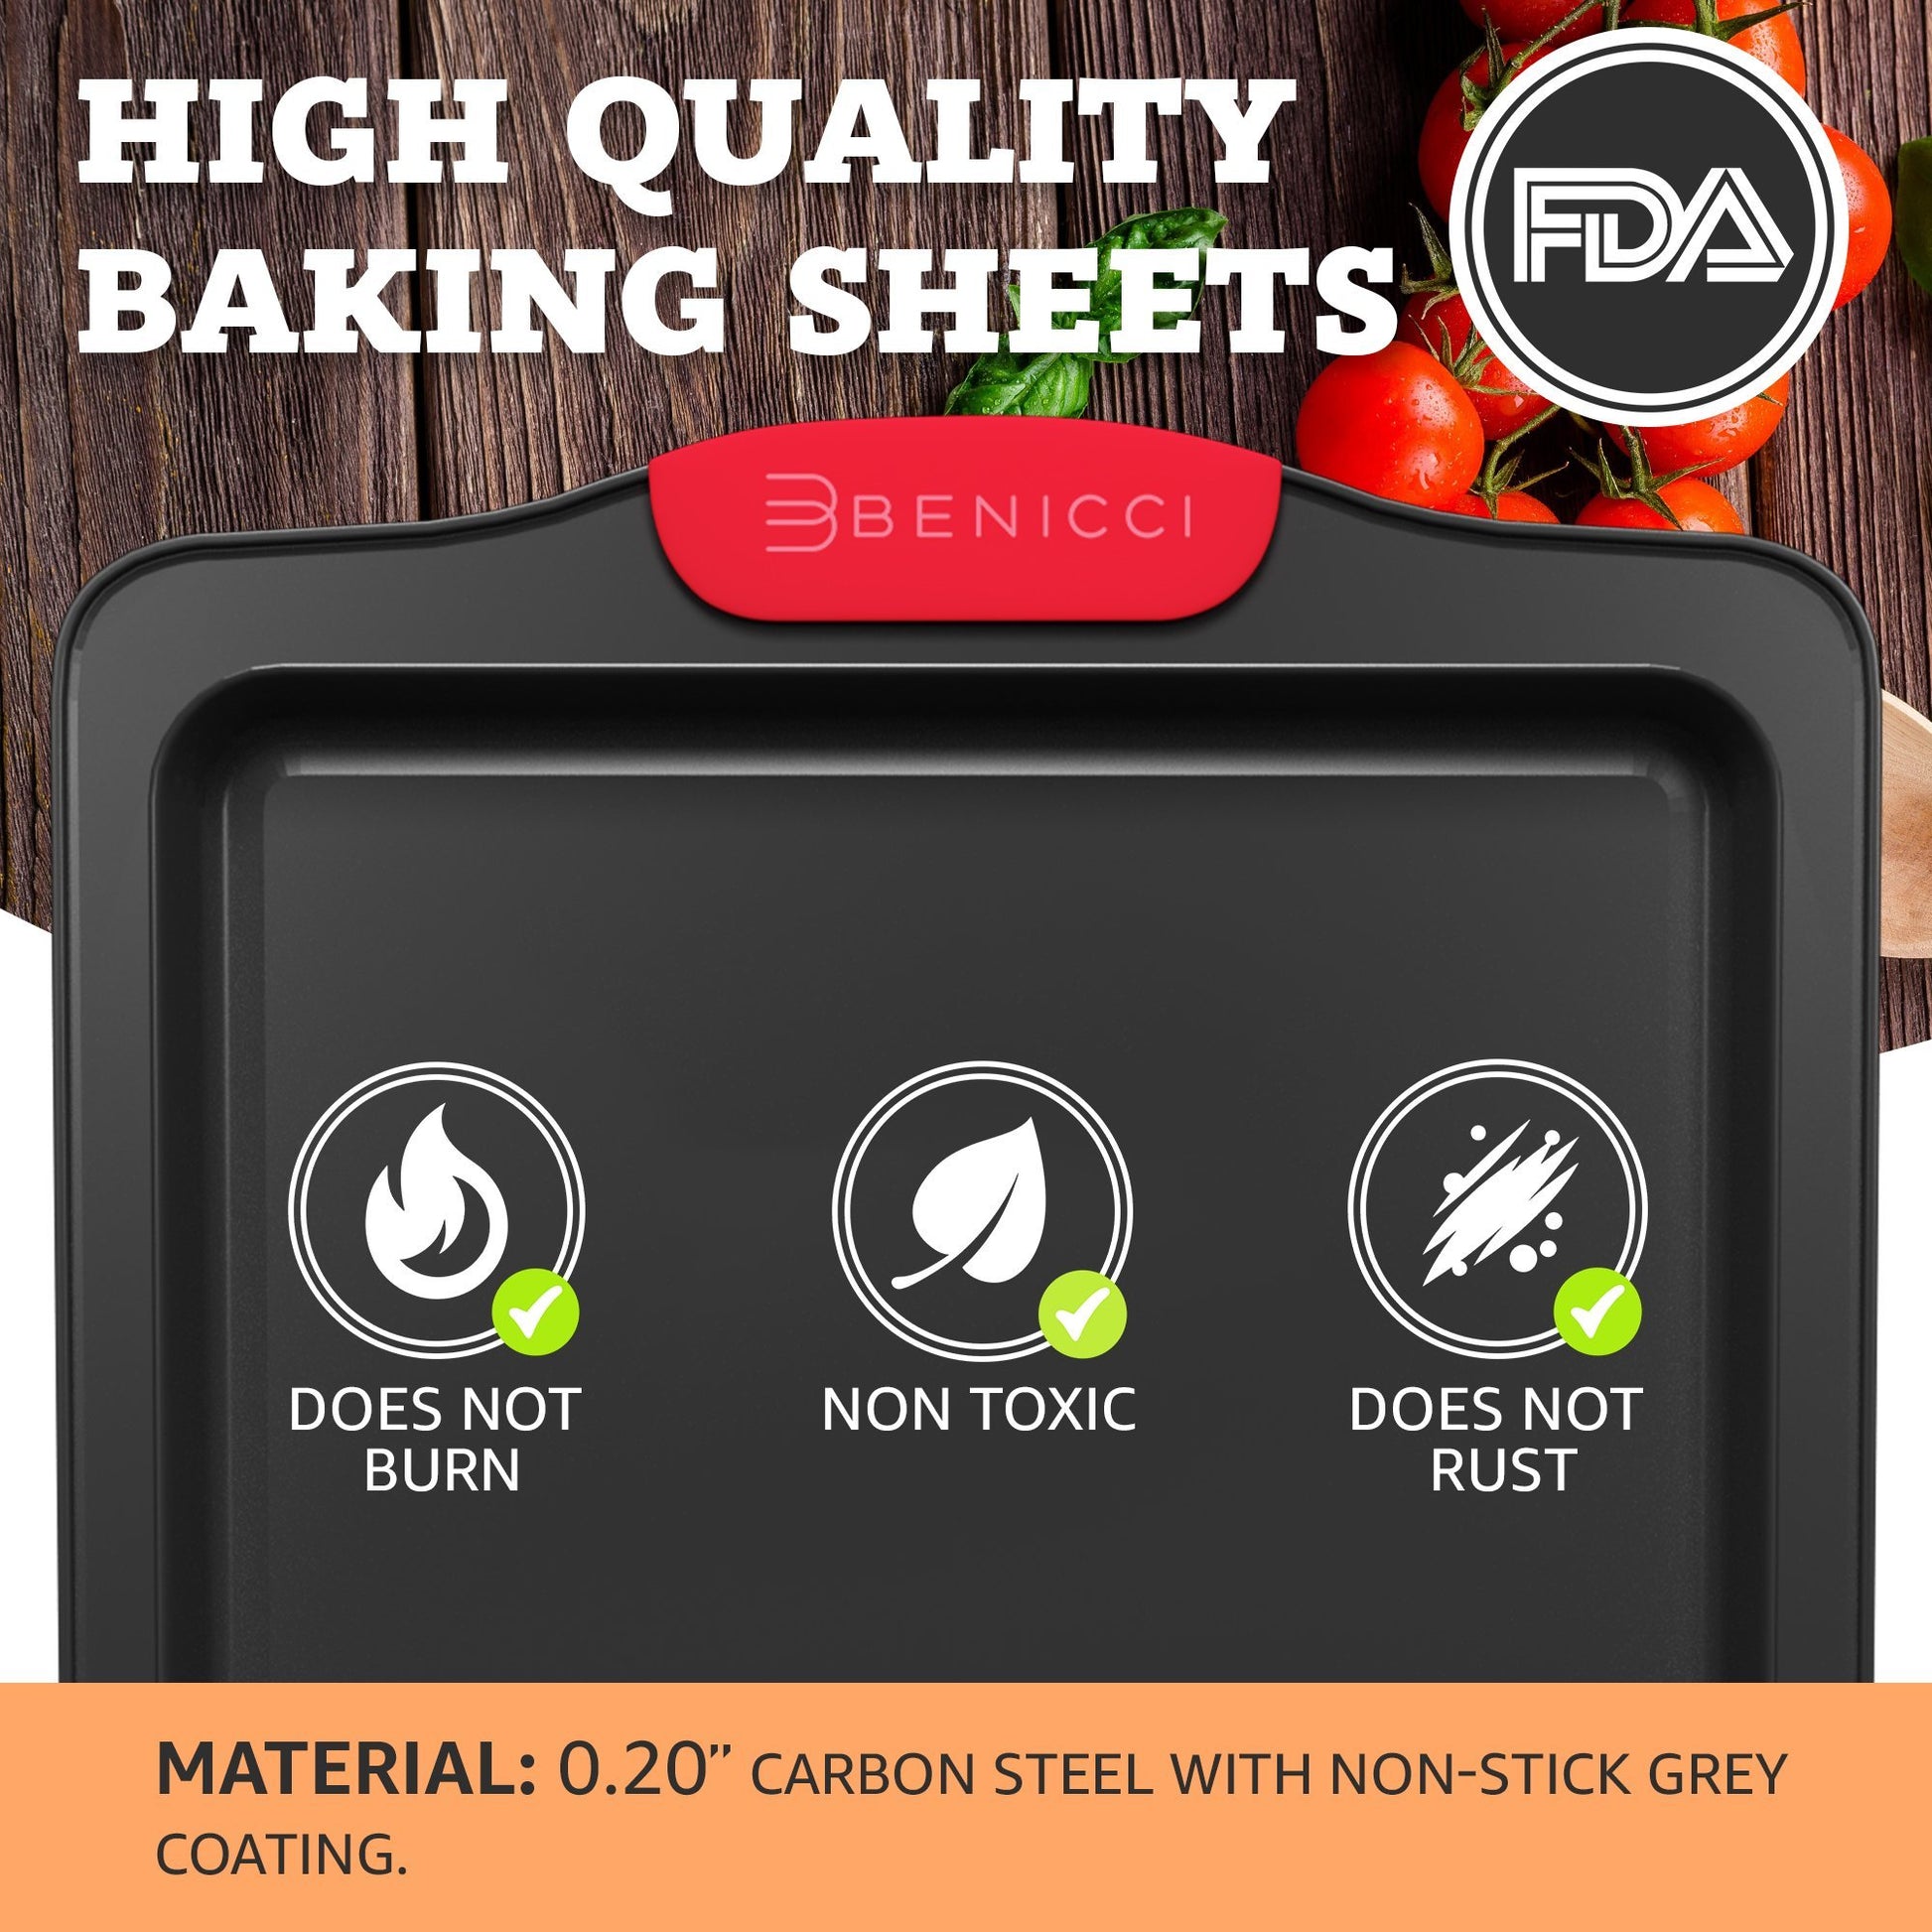 7 Best Non Toxic Baking Sheets For Delicious Treats - GenTwenty